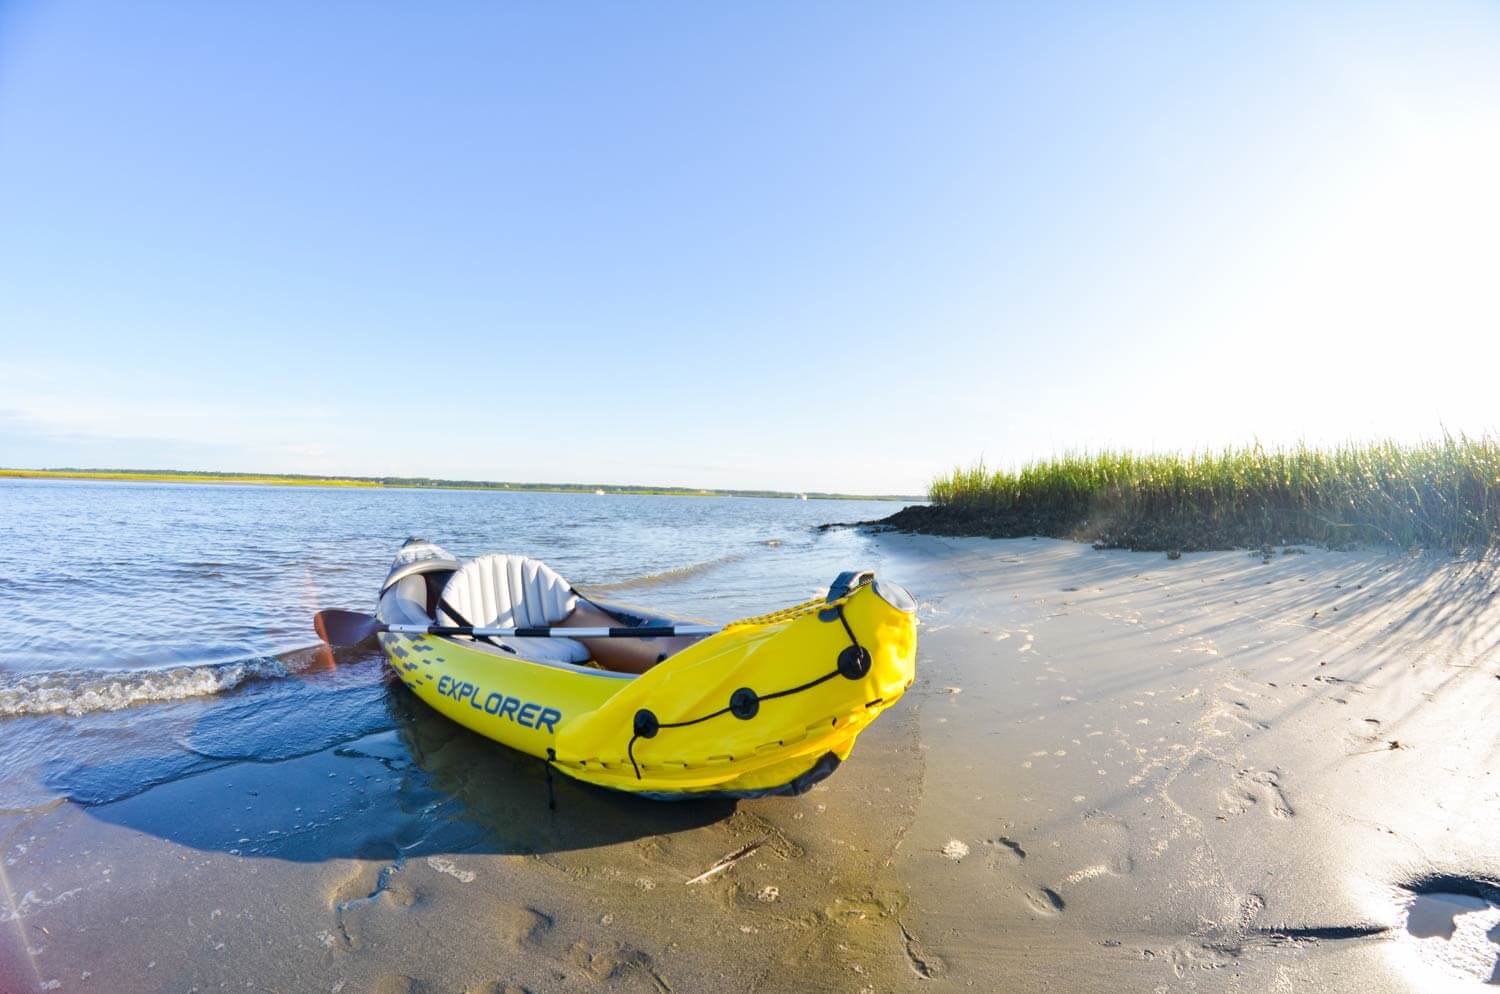 inflatable kayak on beach in front of grass dunes